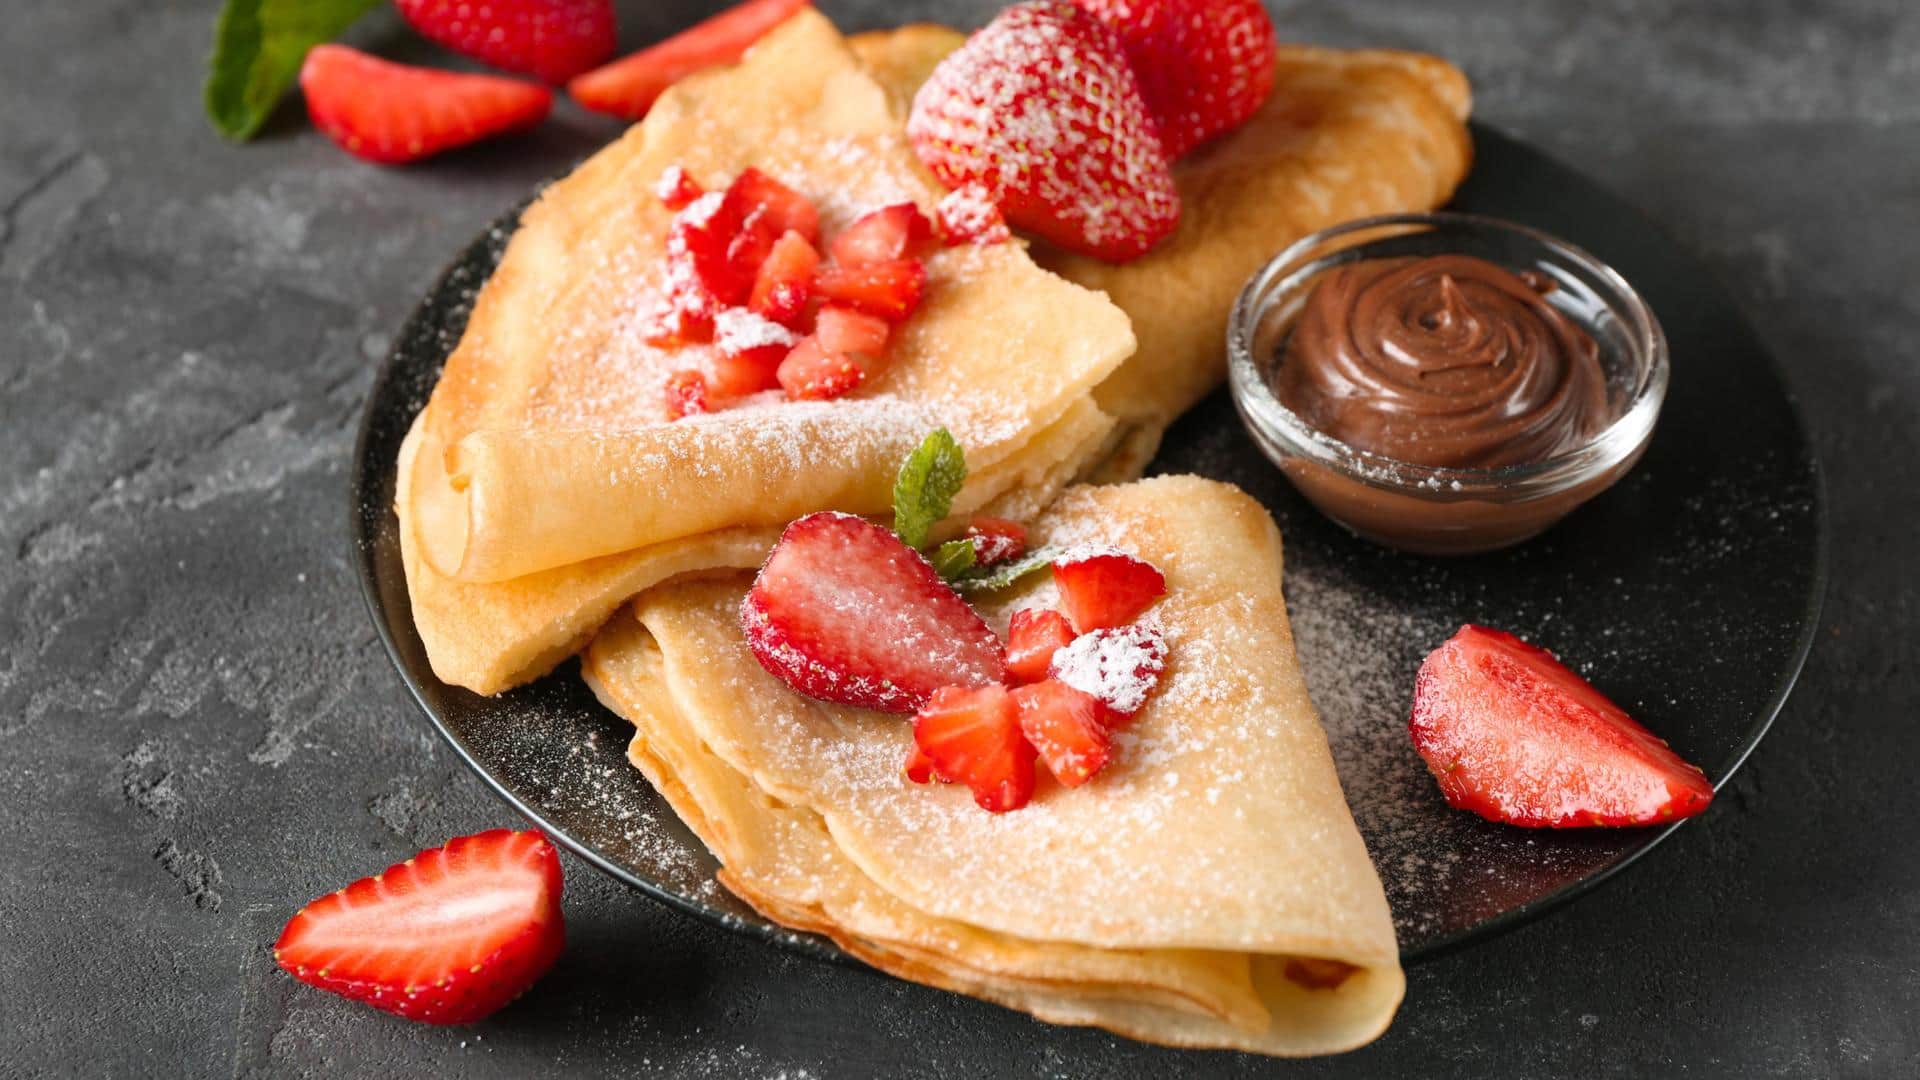 Celebrate Crepe Day with these easy-peasy recipes